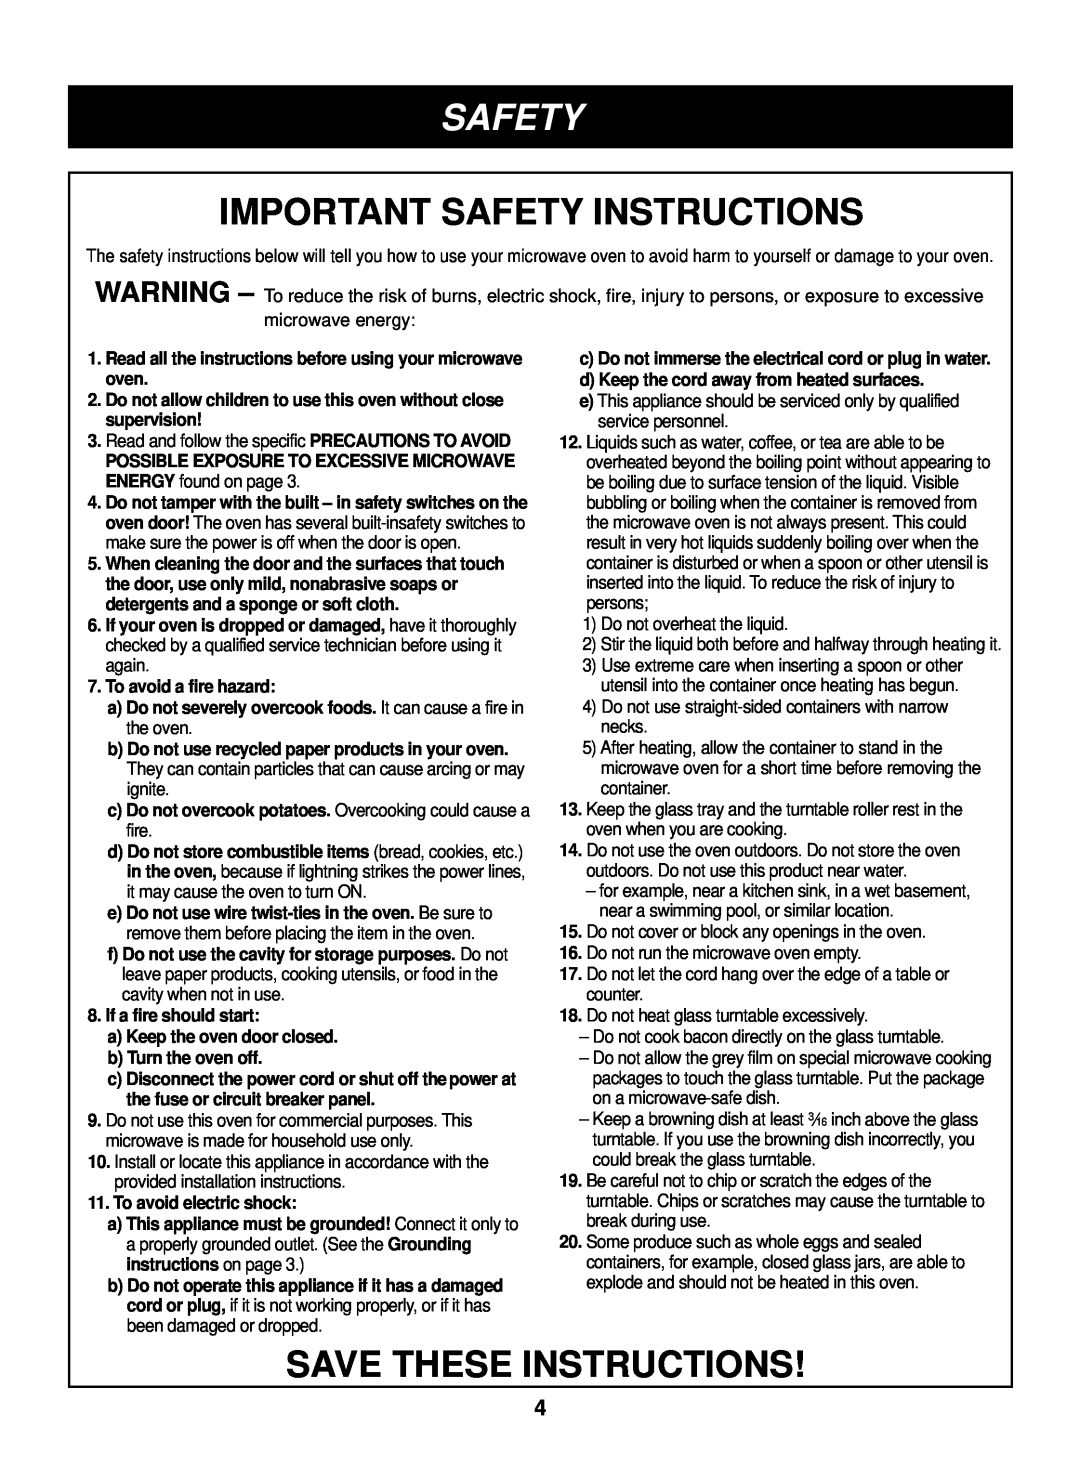 LG Electronics LCRM1240SW manual Important Safety Instructions, Save These Instructions 